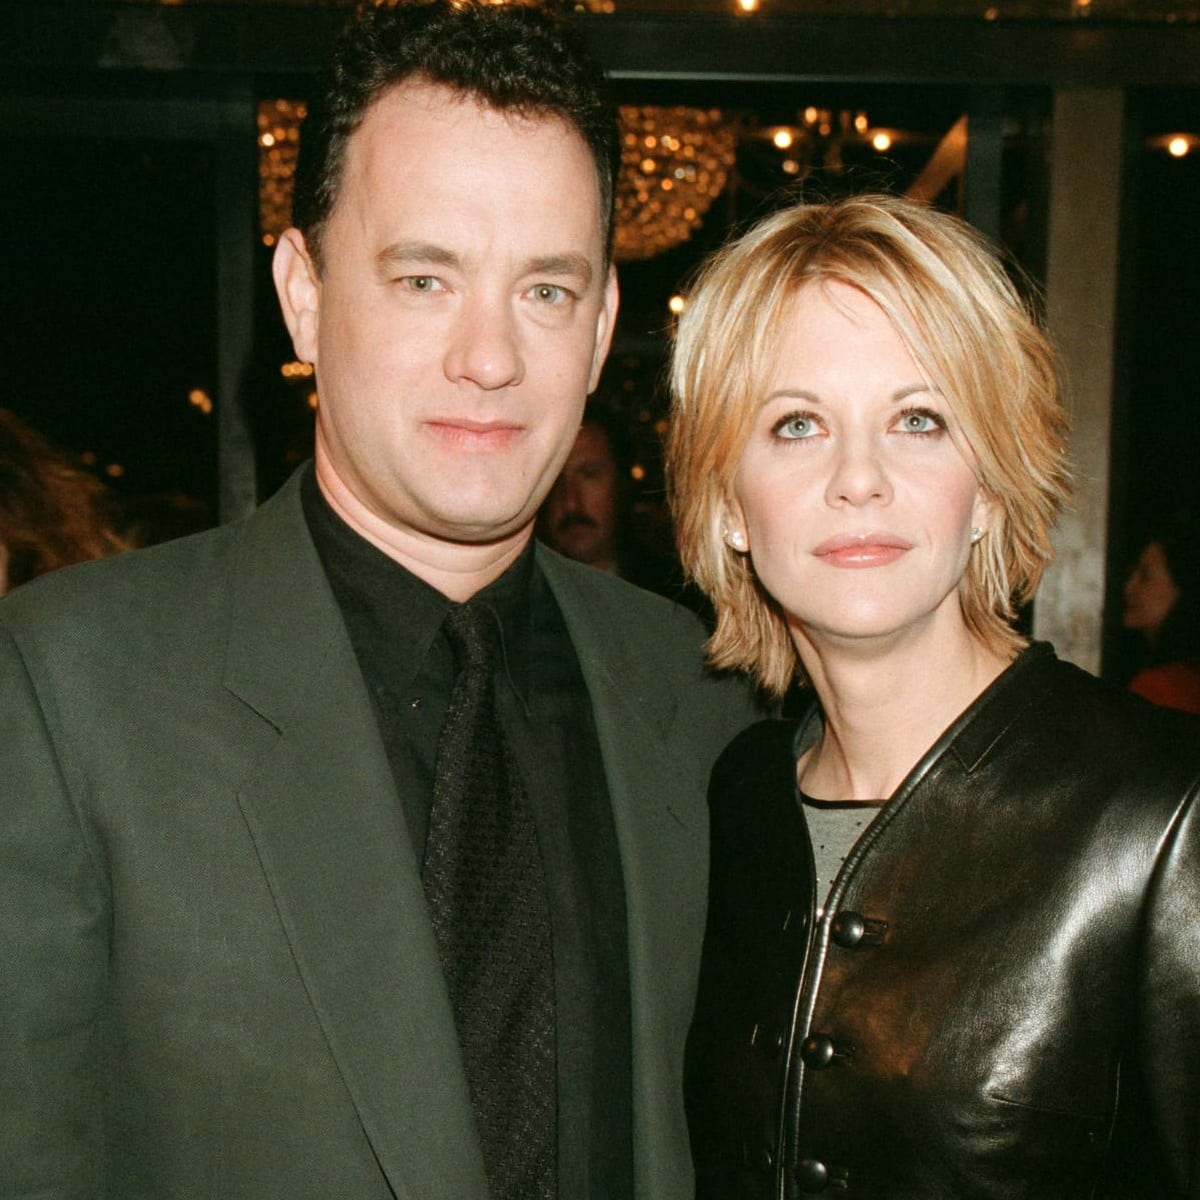 Actress Meg Ryan and actor Tom Hanks attend the "You've Got Mail" New York City Premiere on December 10, 1998